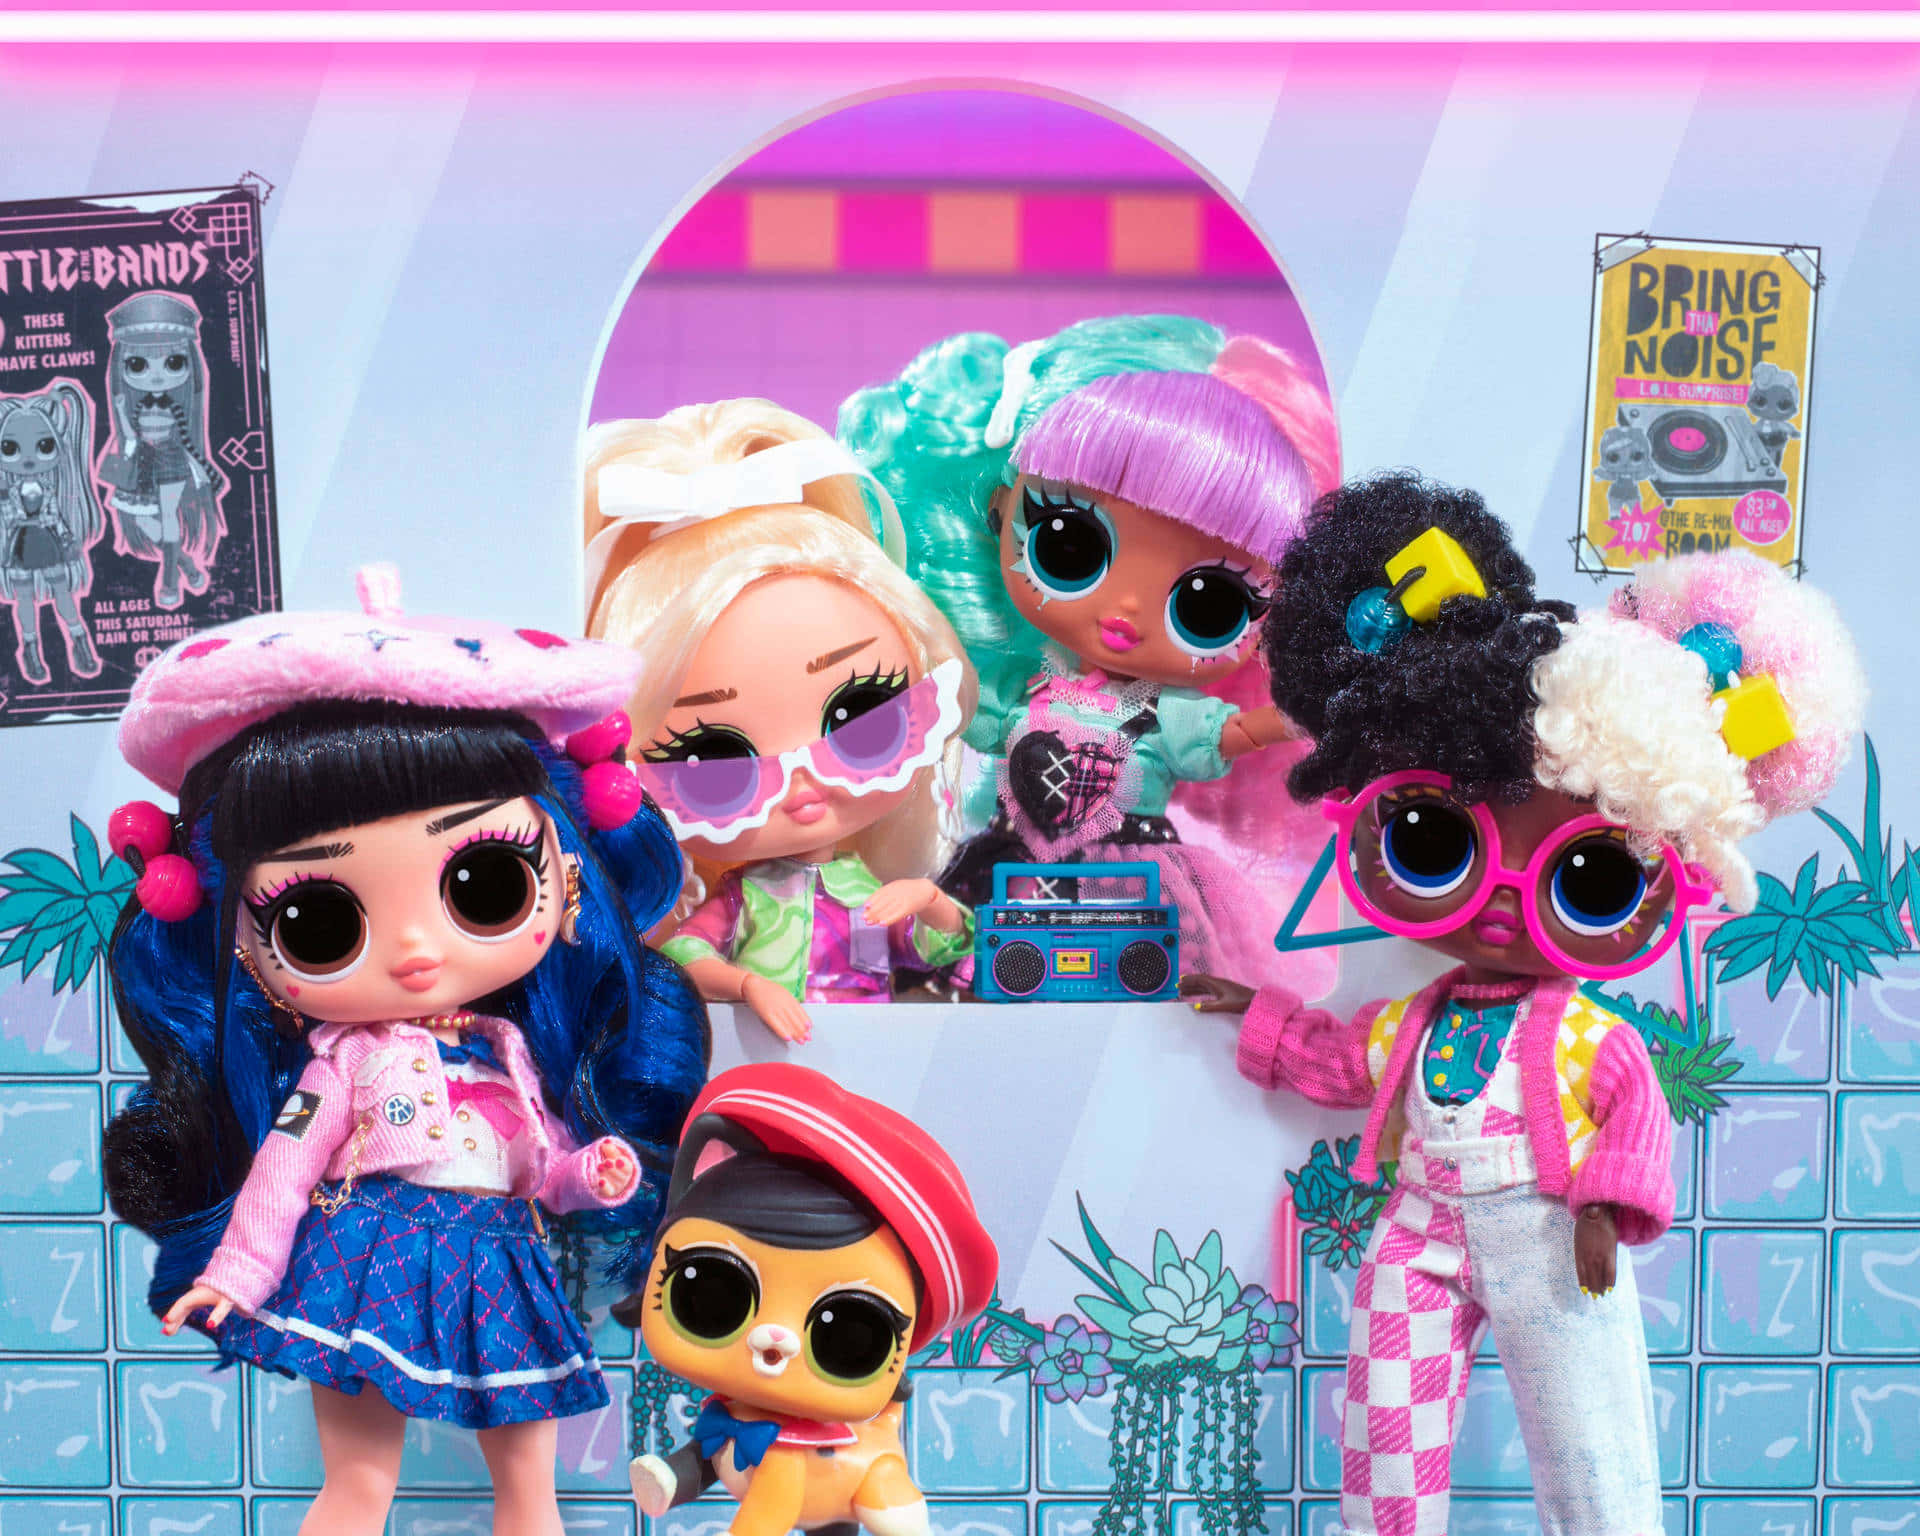 Surprise your friends with the colorful fun of Lol Dolls!